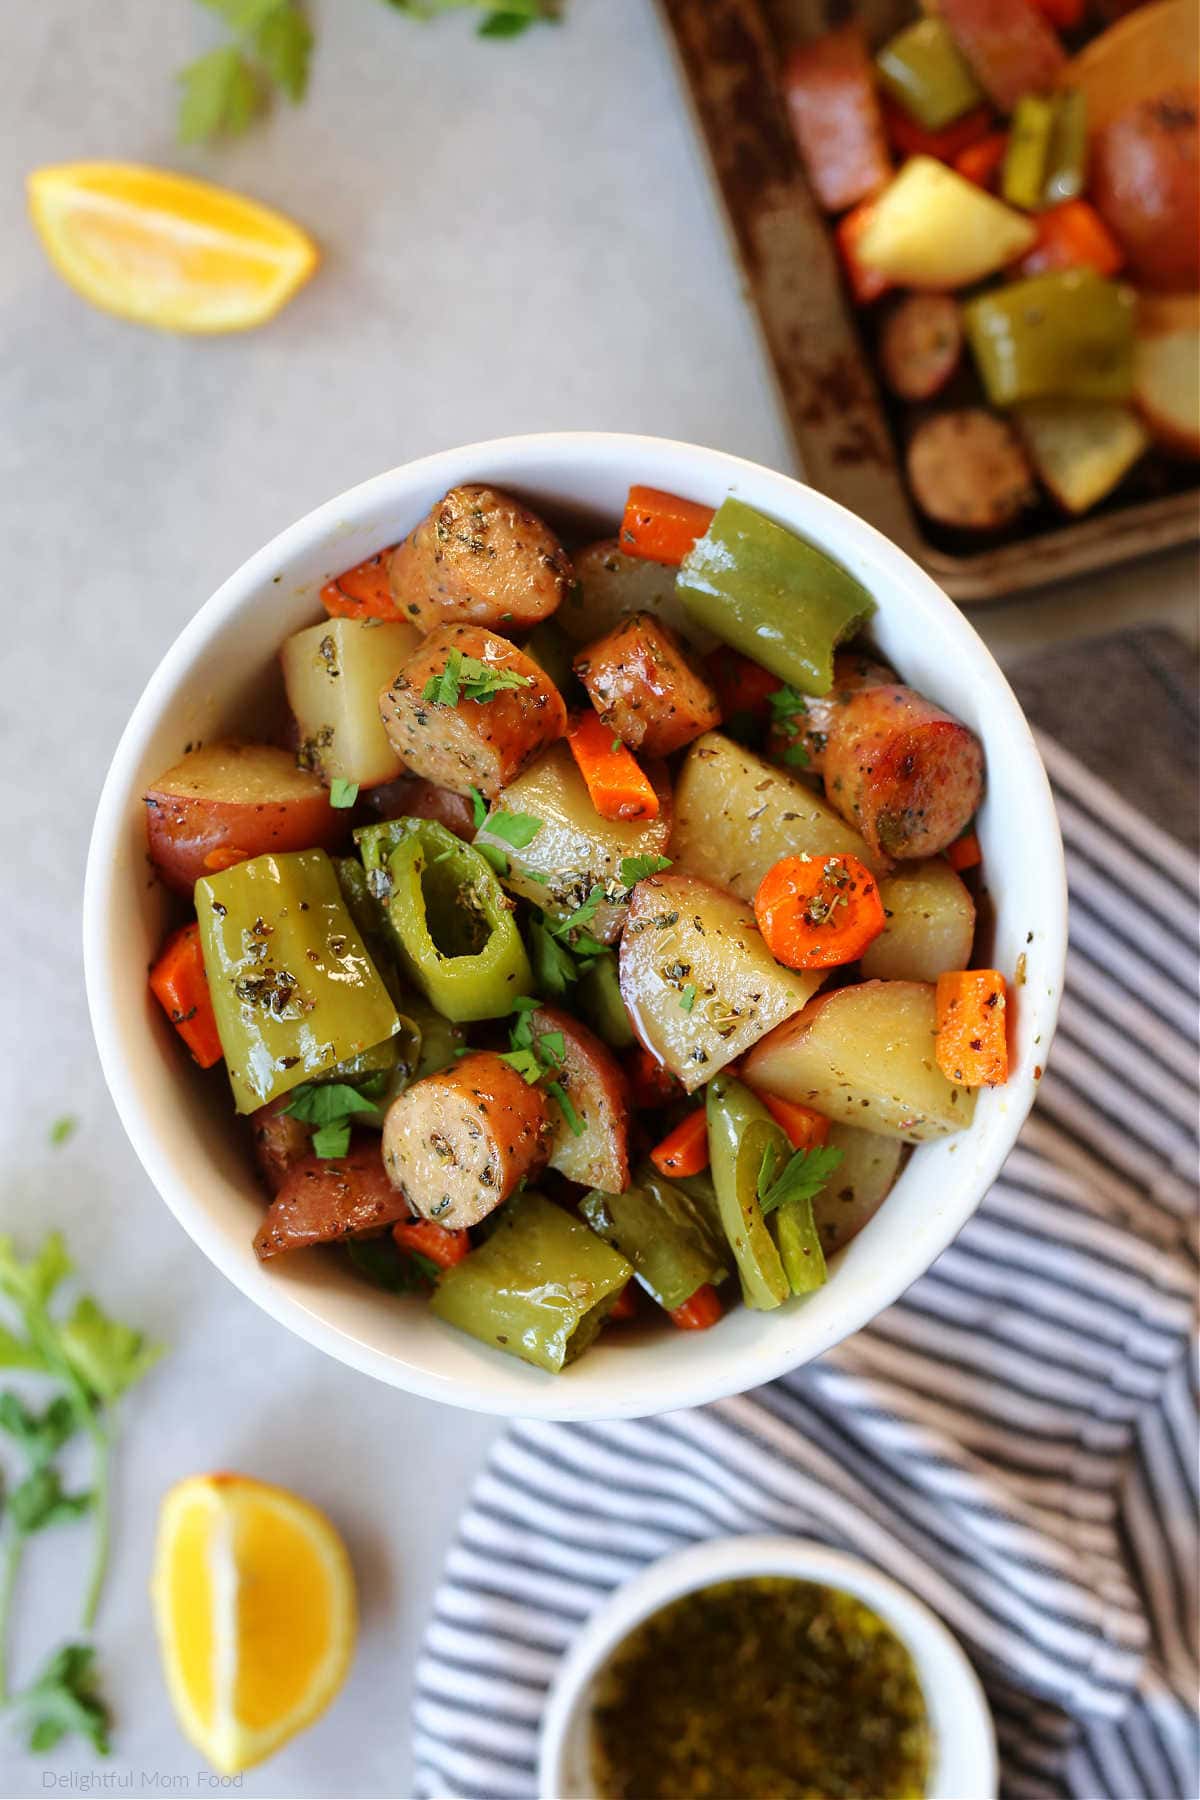 Sheet pan sausage and veggies roasted and served in a bowl.